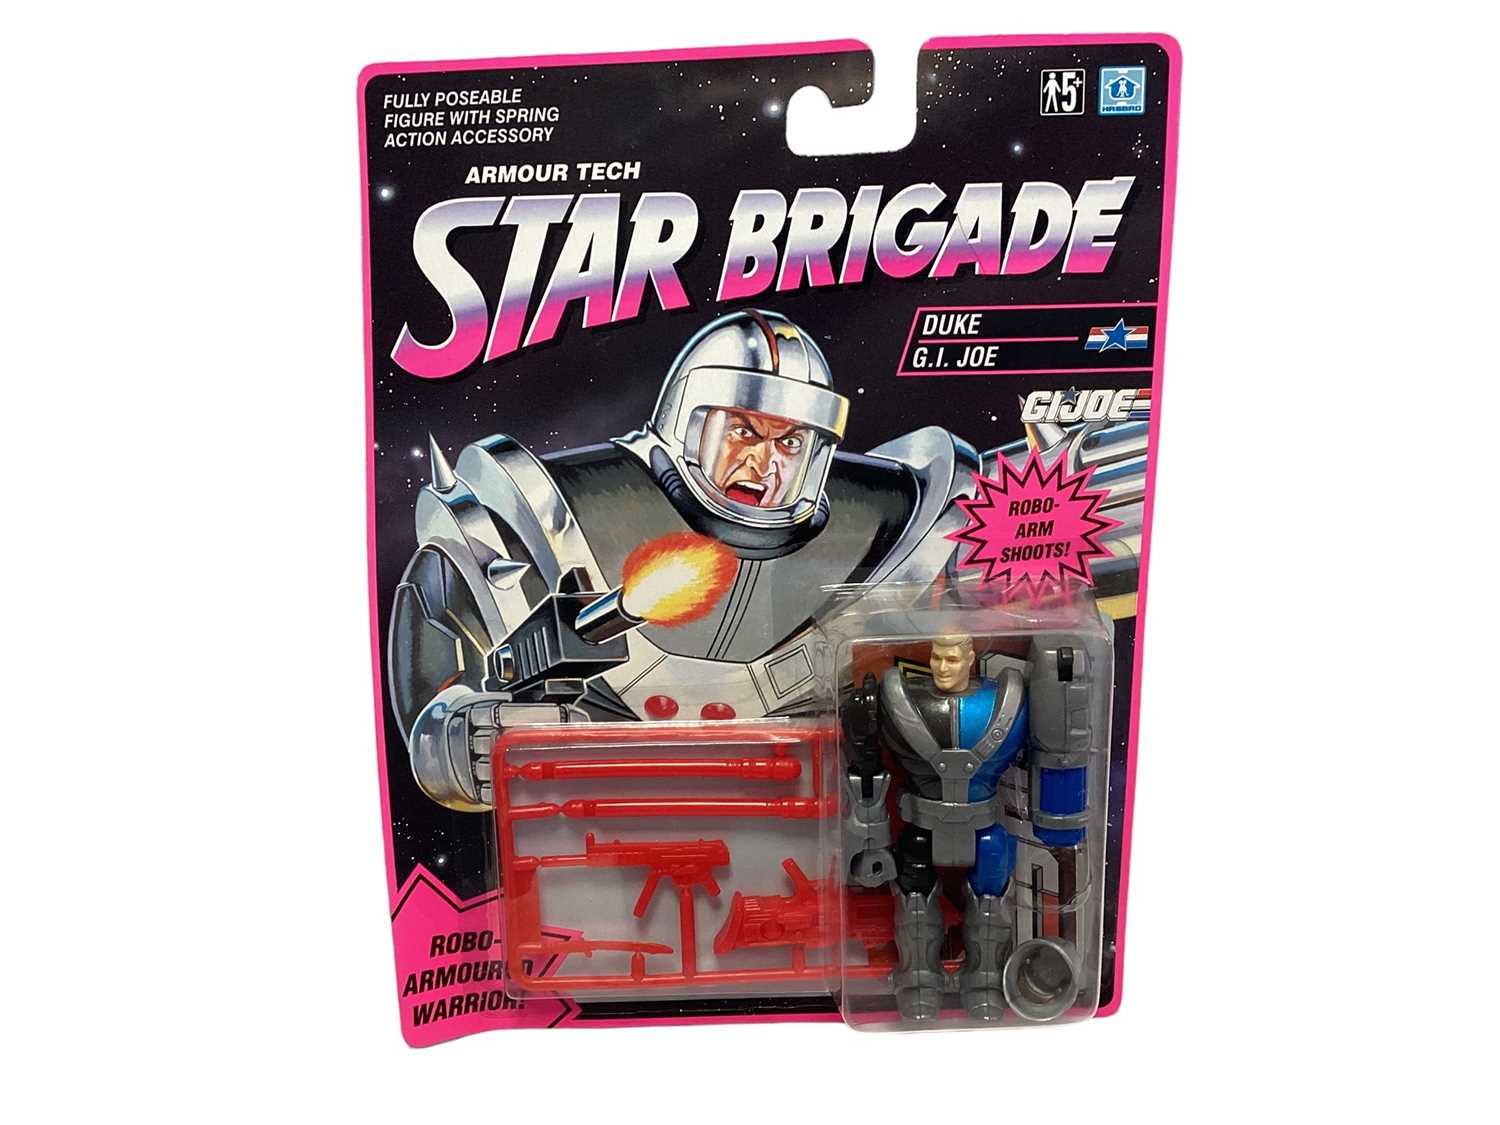 Lot 141 - Hasbro (c1993) Star Brigade GI Joe Armour Tech Astronaut Fighter Duke 3 1/2" action figure with accessories, on punched card with bubblepack No.06784  (1)